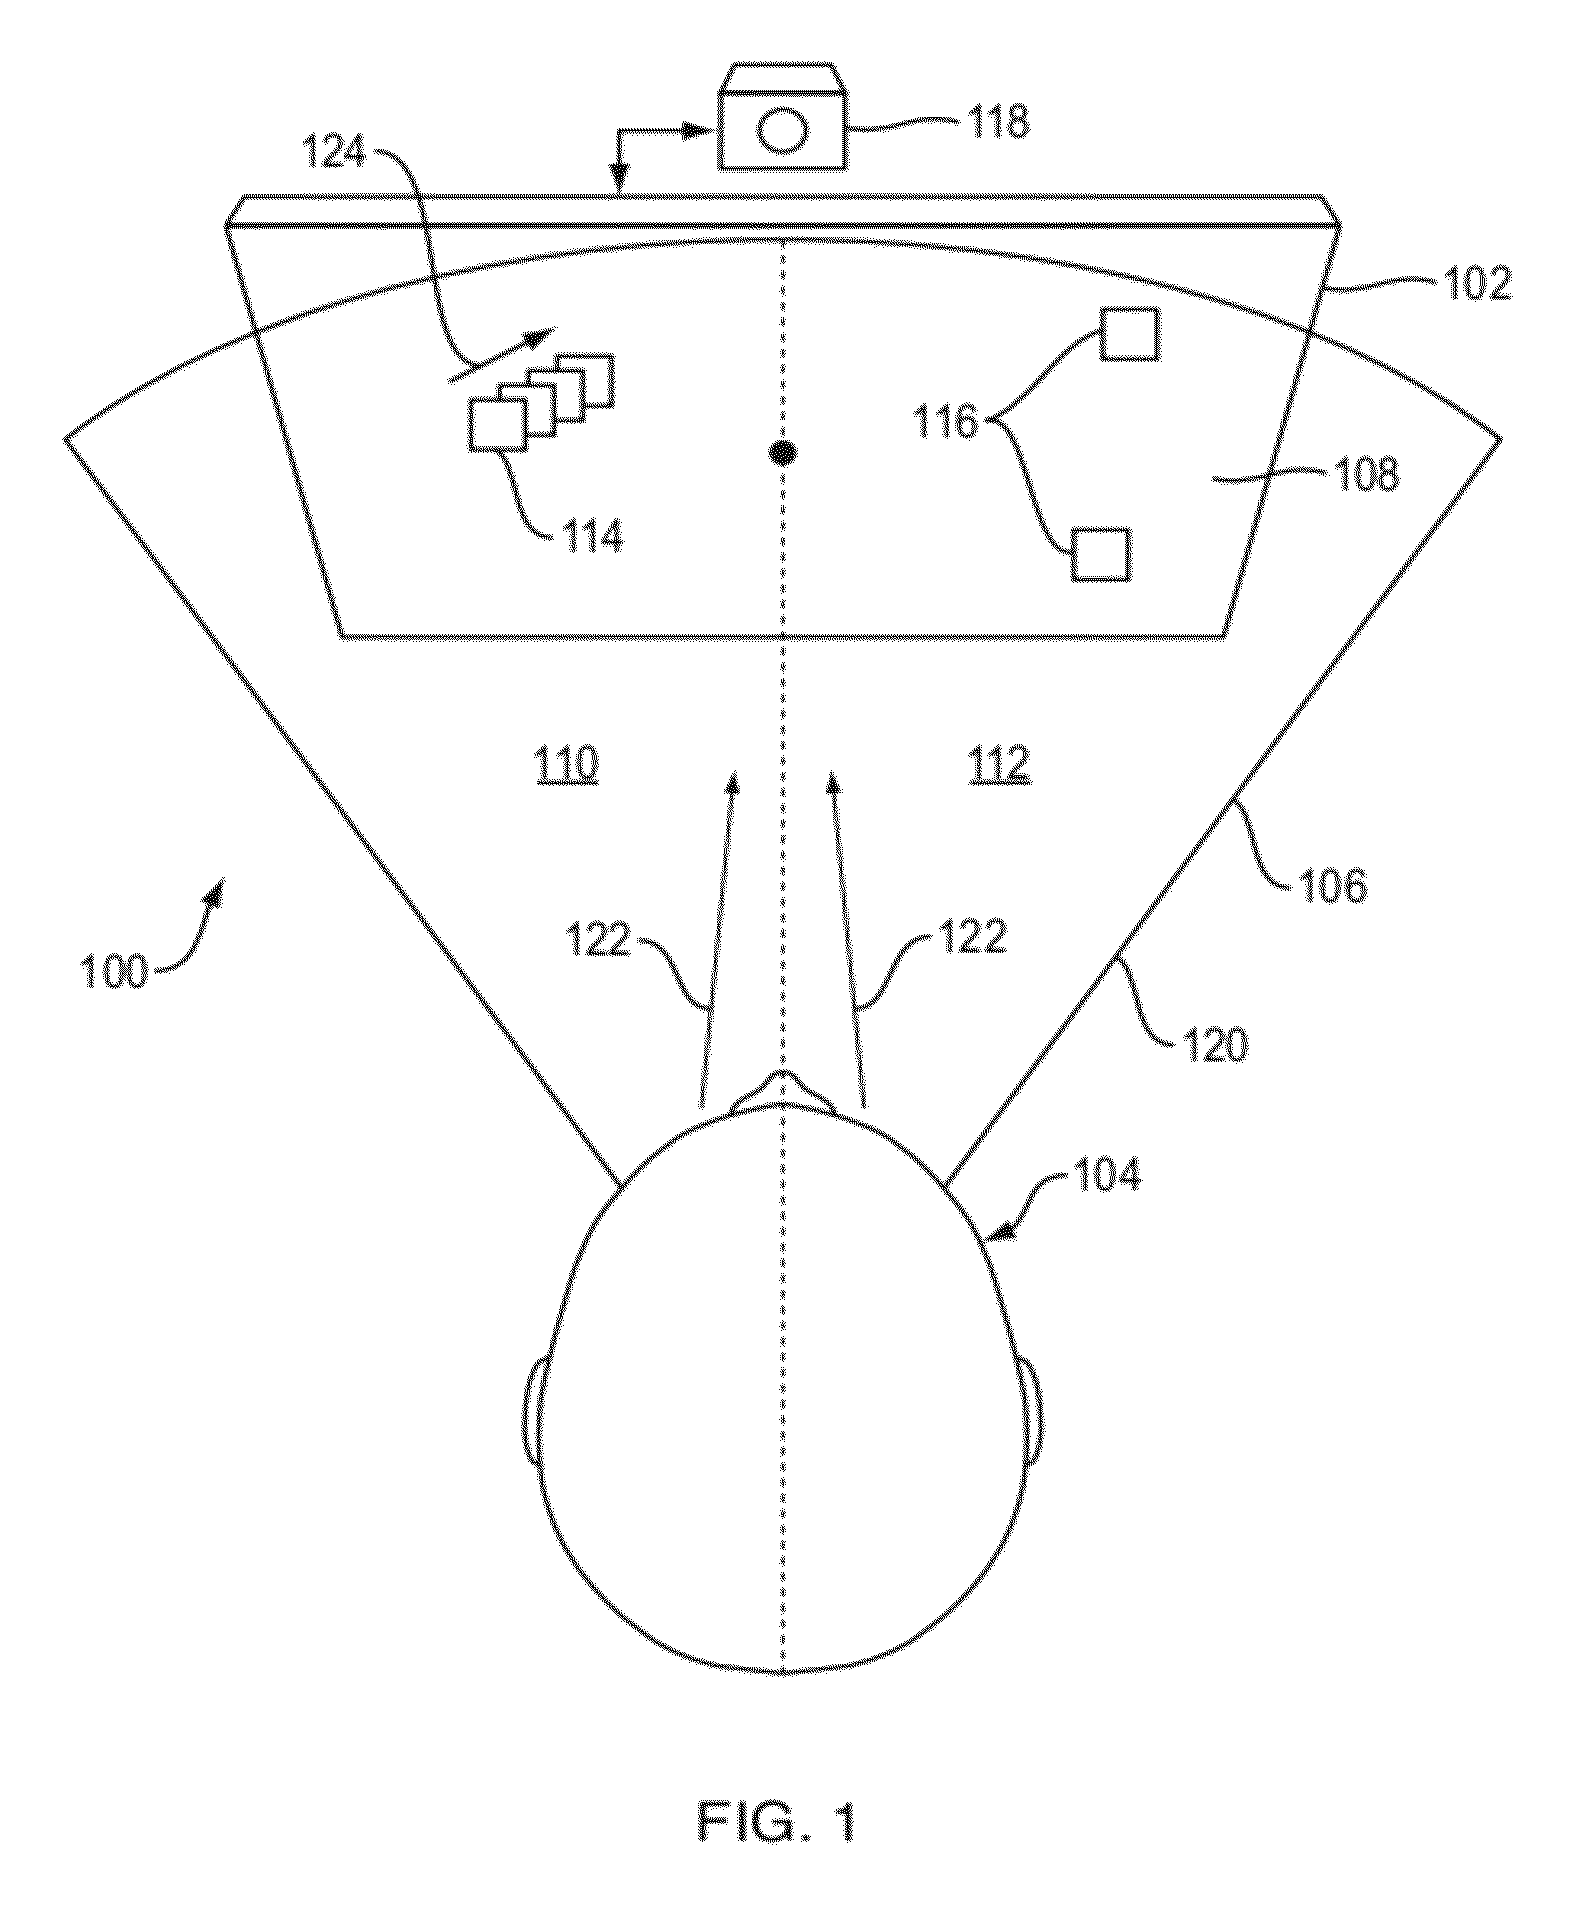 Method and apparatus accounting for independent cognitive capacities in the right vs. left half of vision